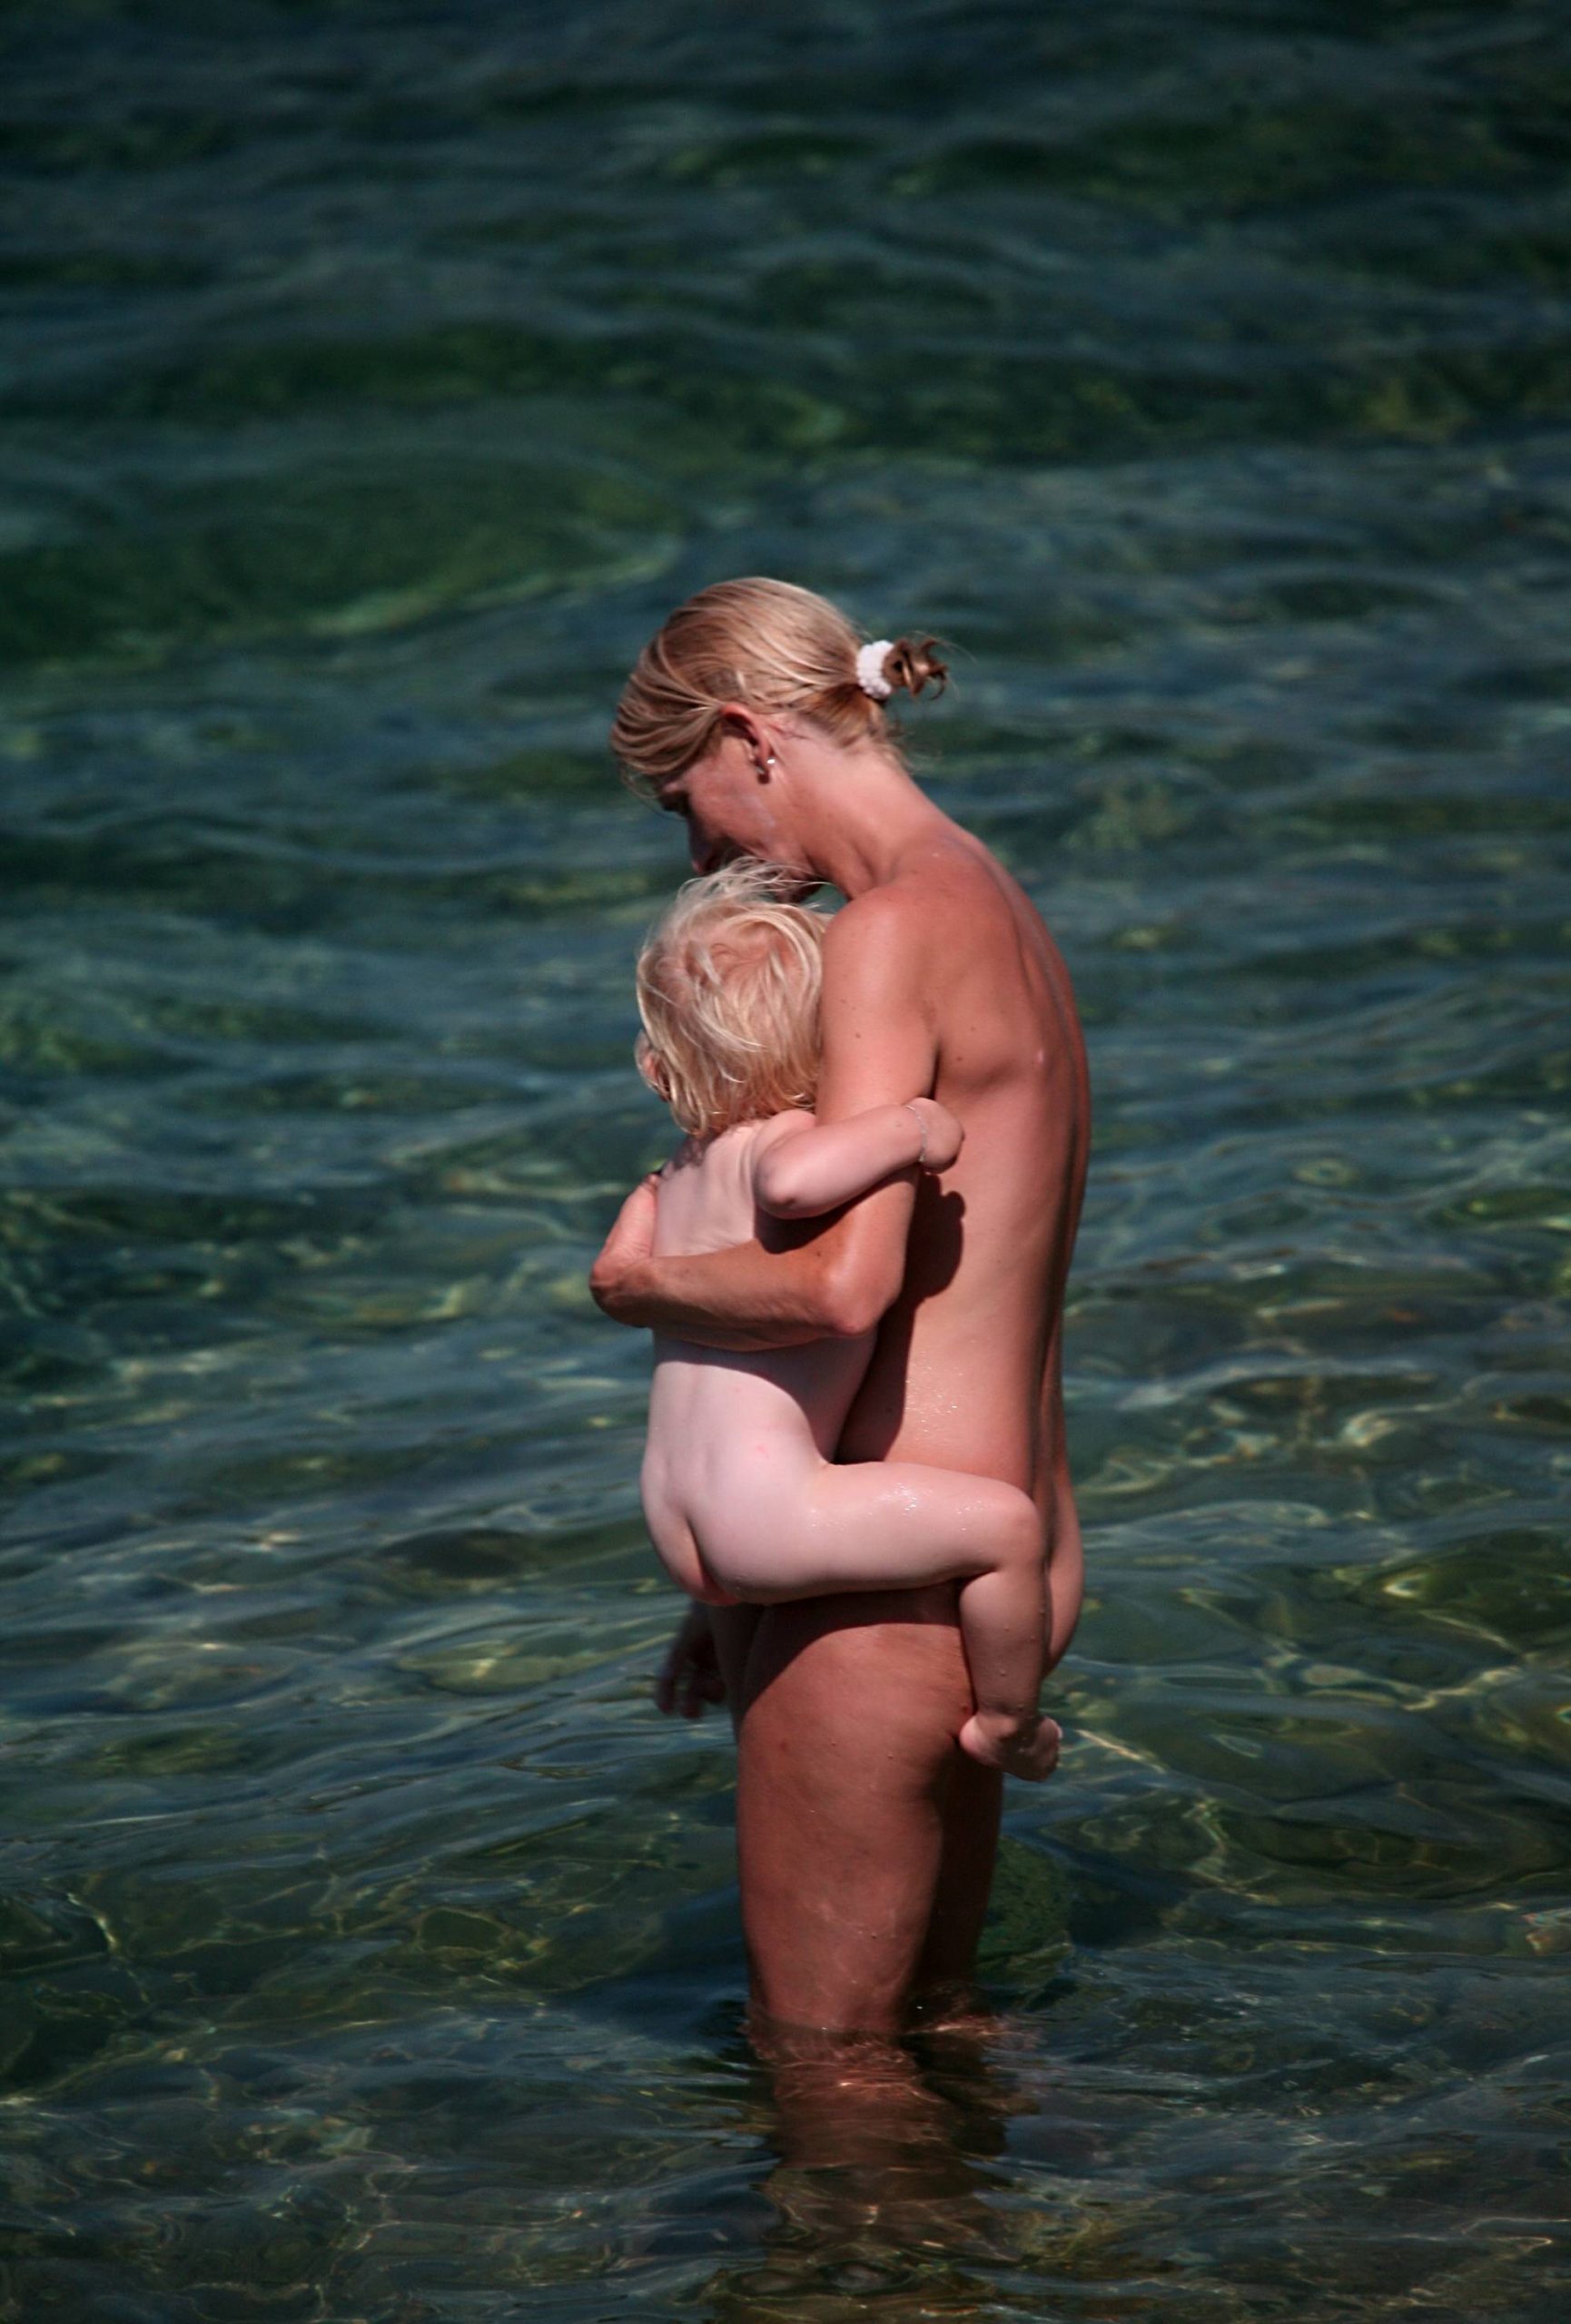 Pure Nudism Images-Introducing Baby to Water - 1